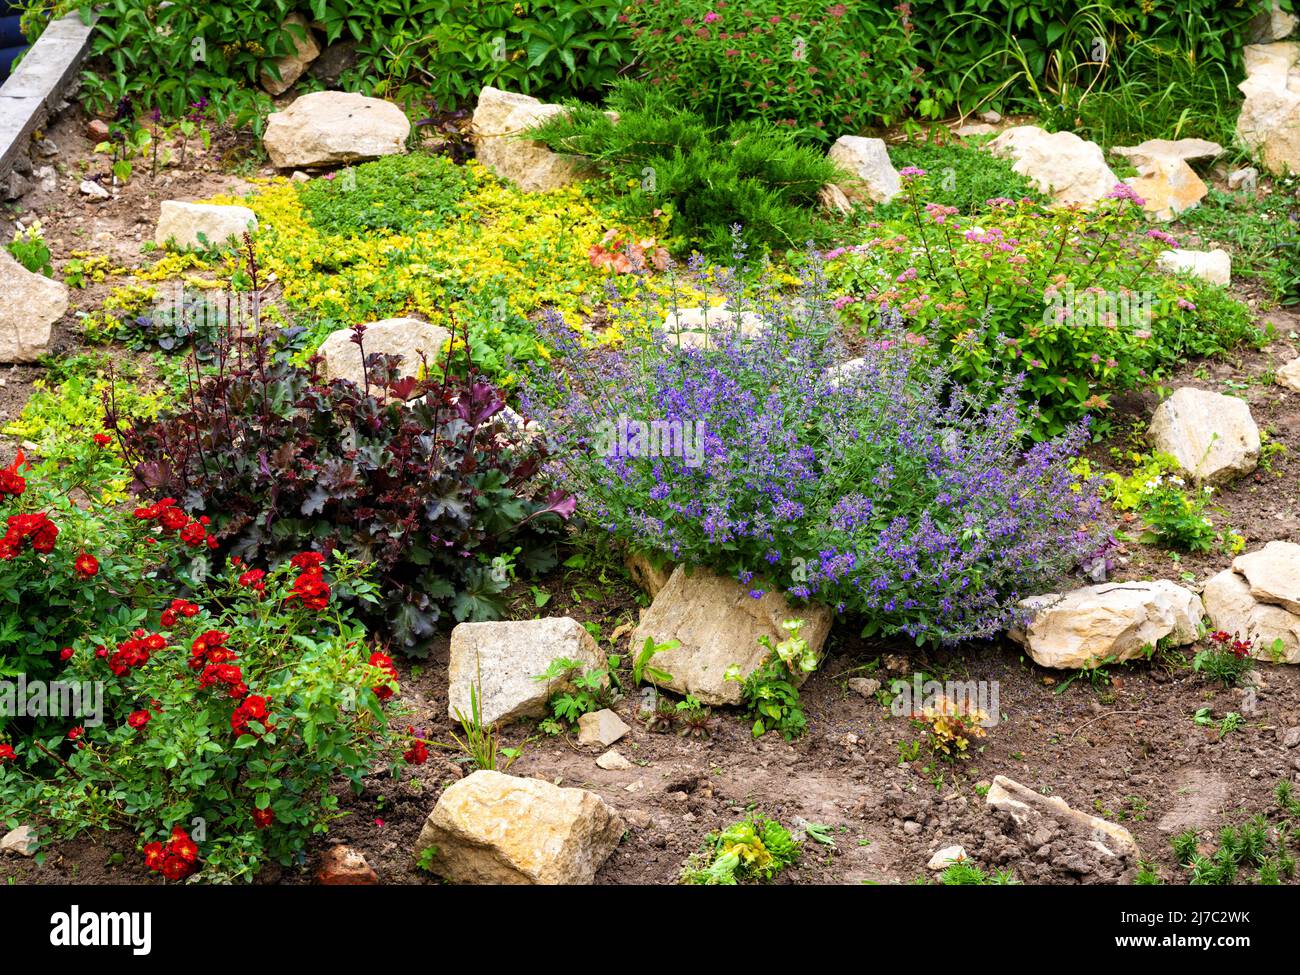 Landscape design in home garden, landscaping with flowers, plants and stones in summer. Landscaped backyard of residential house. Stock Photo